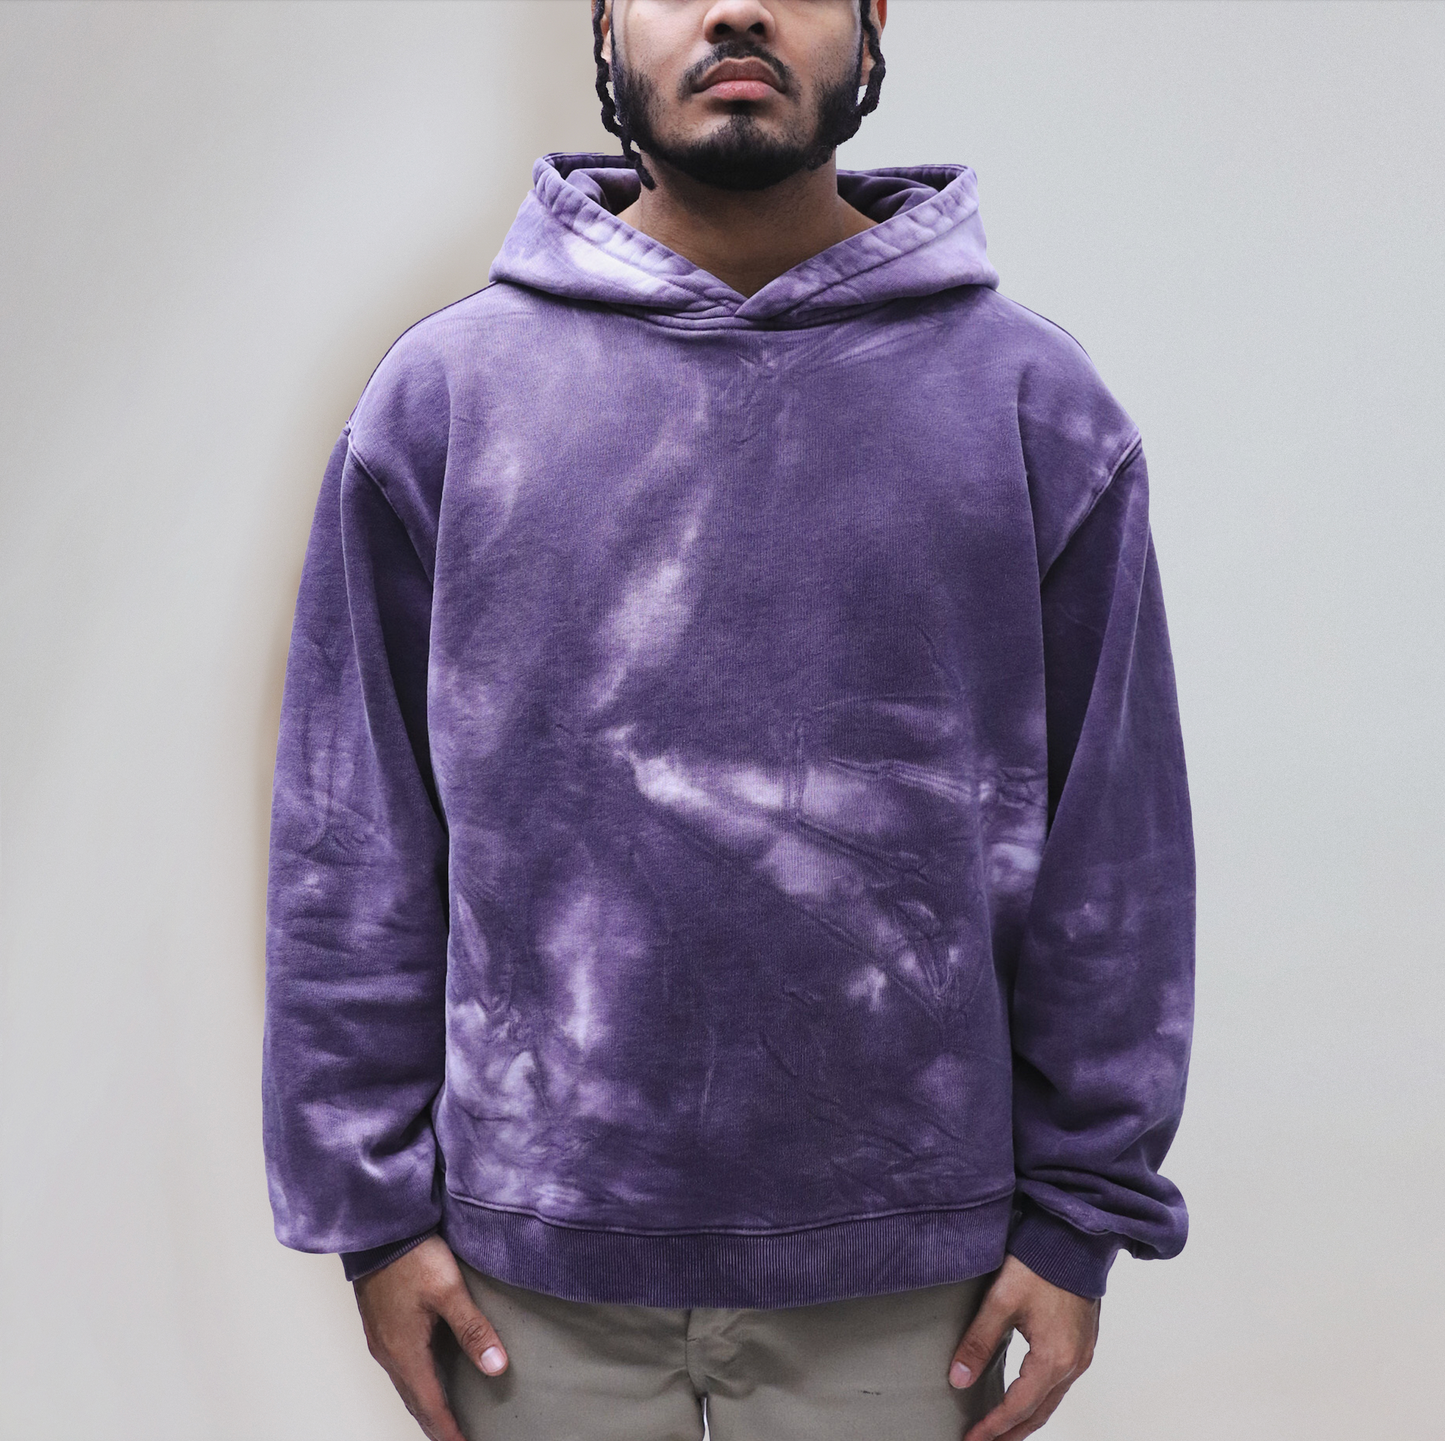 Signature Cropped Side Pocket Hoody – Vintage Washed Purple Pain Tie Dye